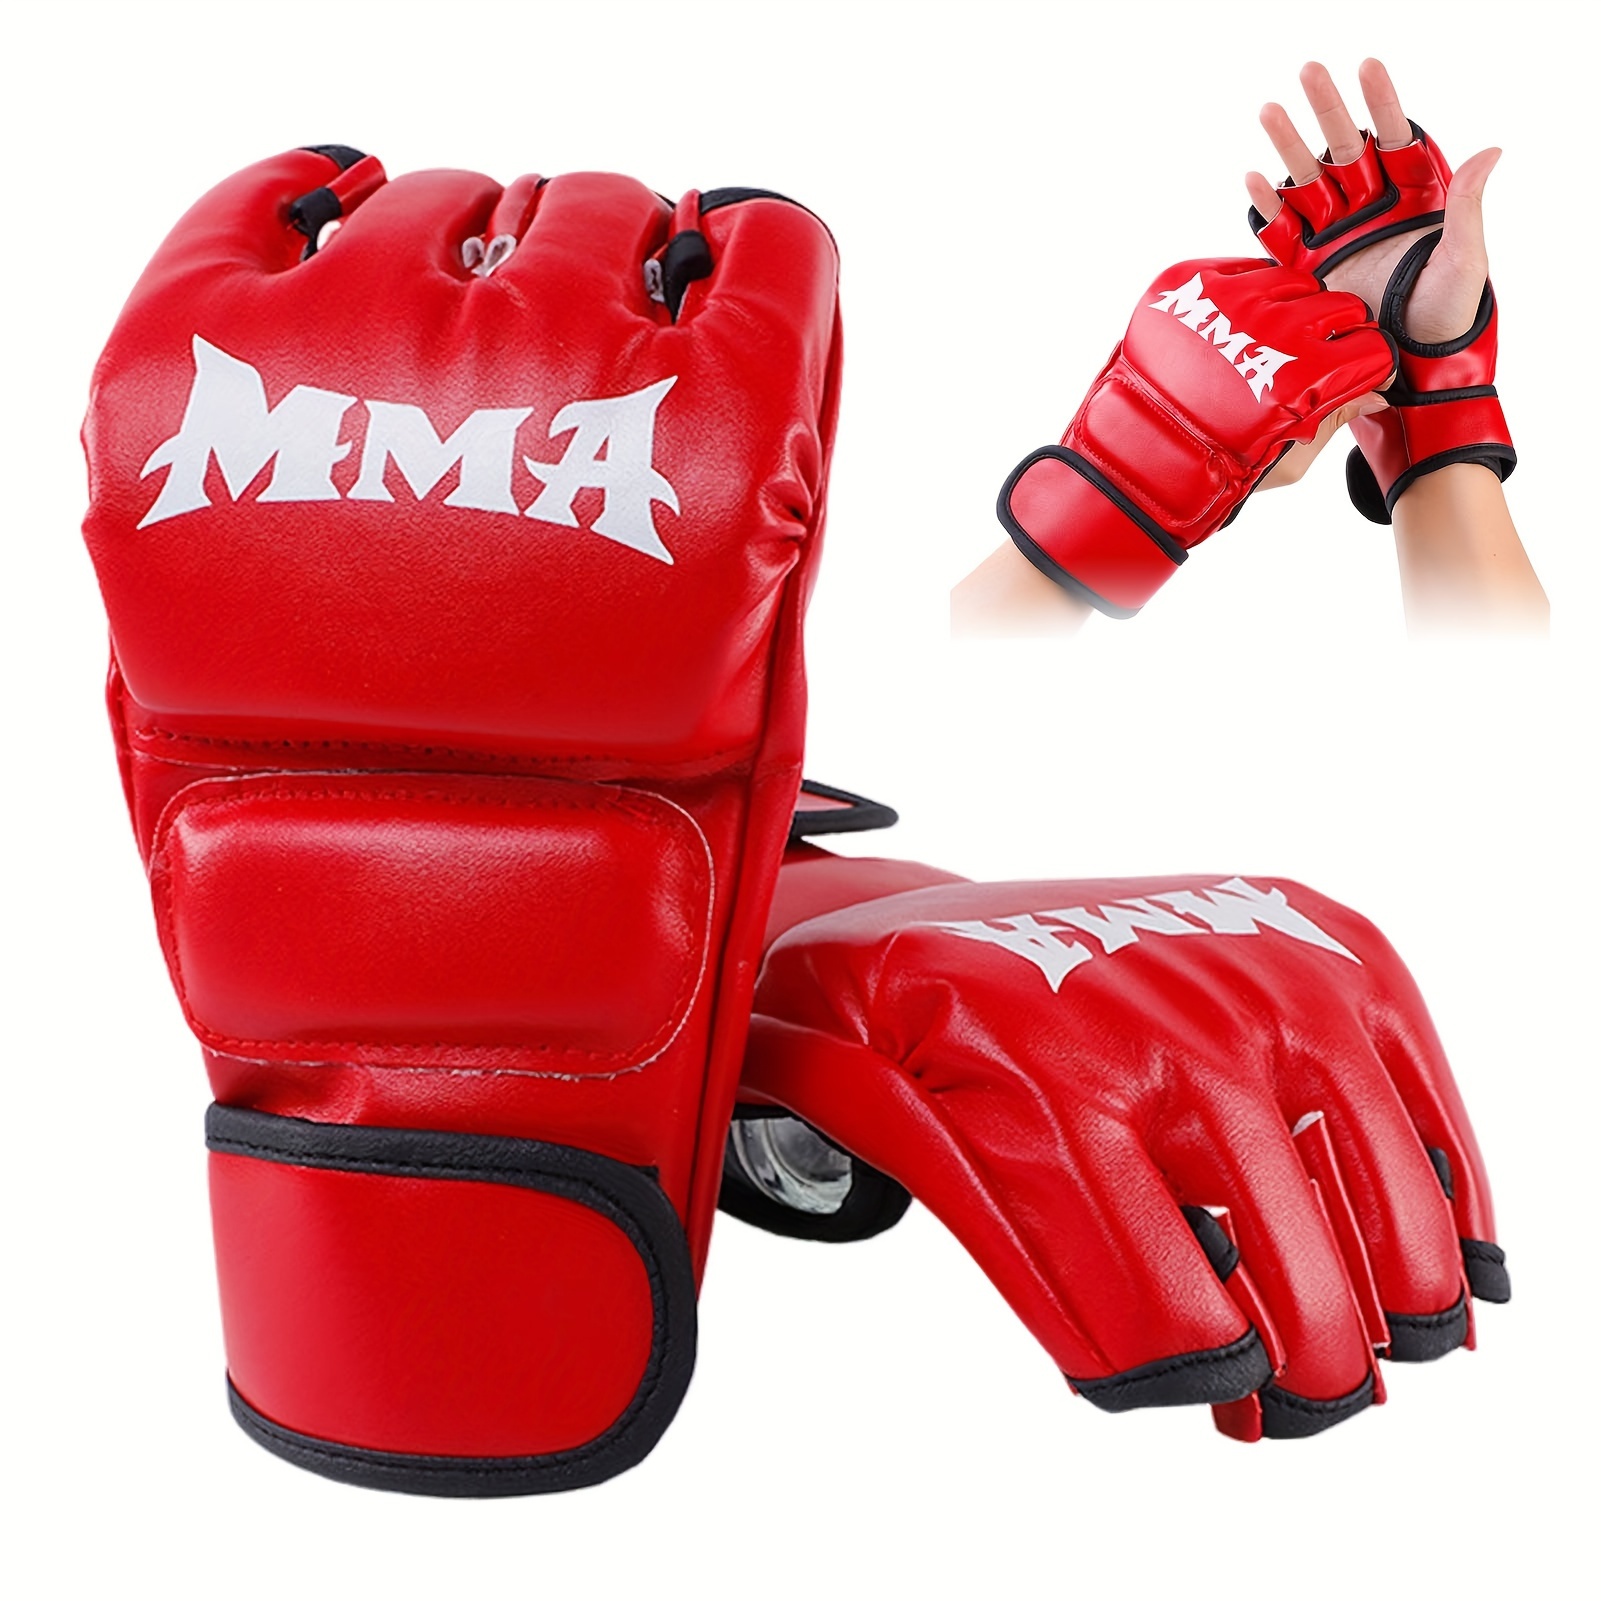 

Martial Arts Training Mma Gloves With Breathable And Sweat-resistant Material Suitable For Fighting Muay Thai